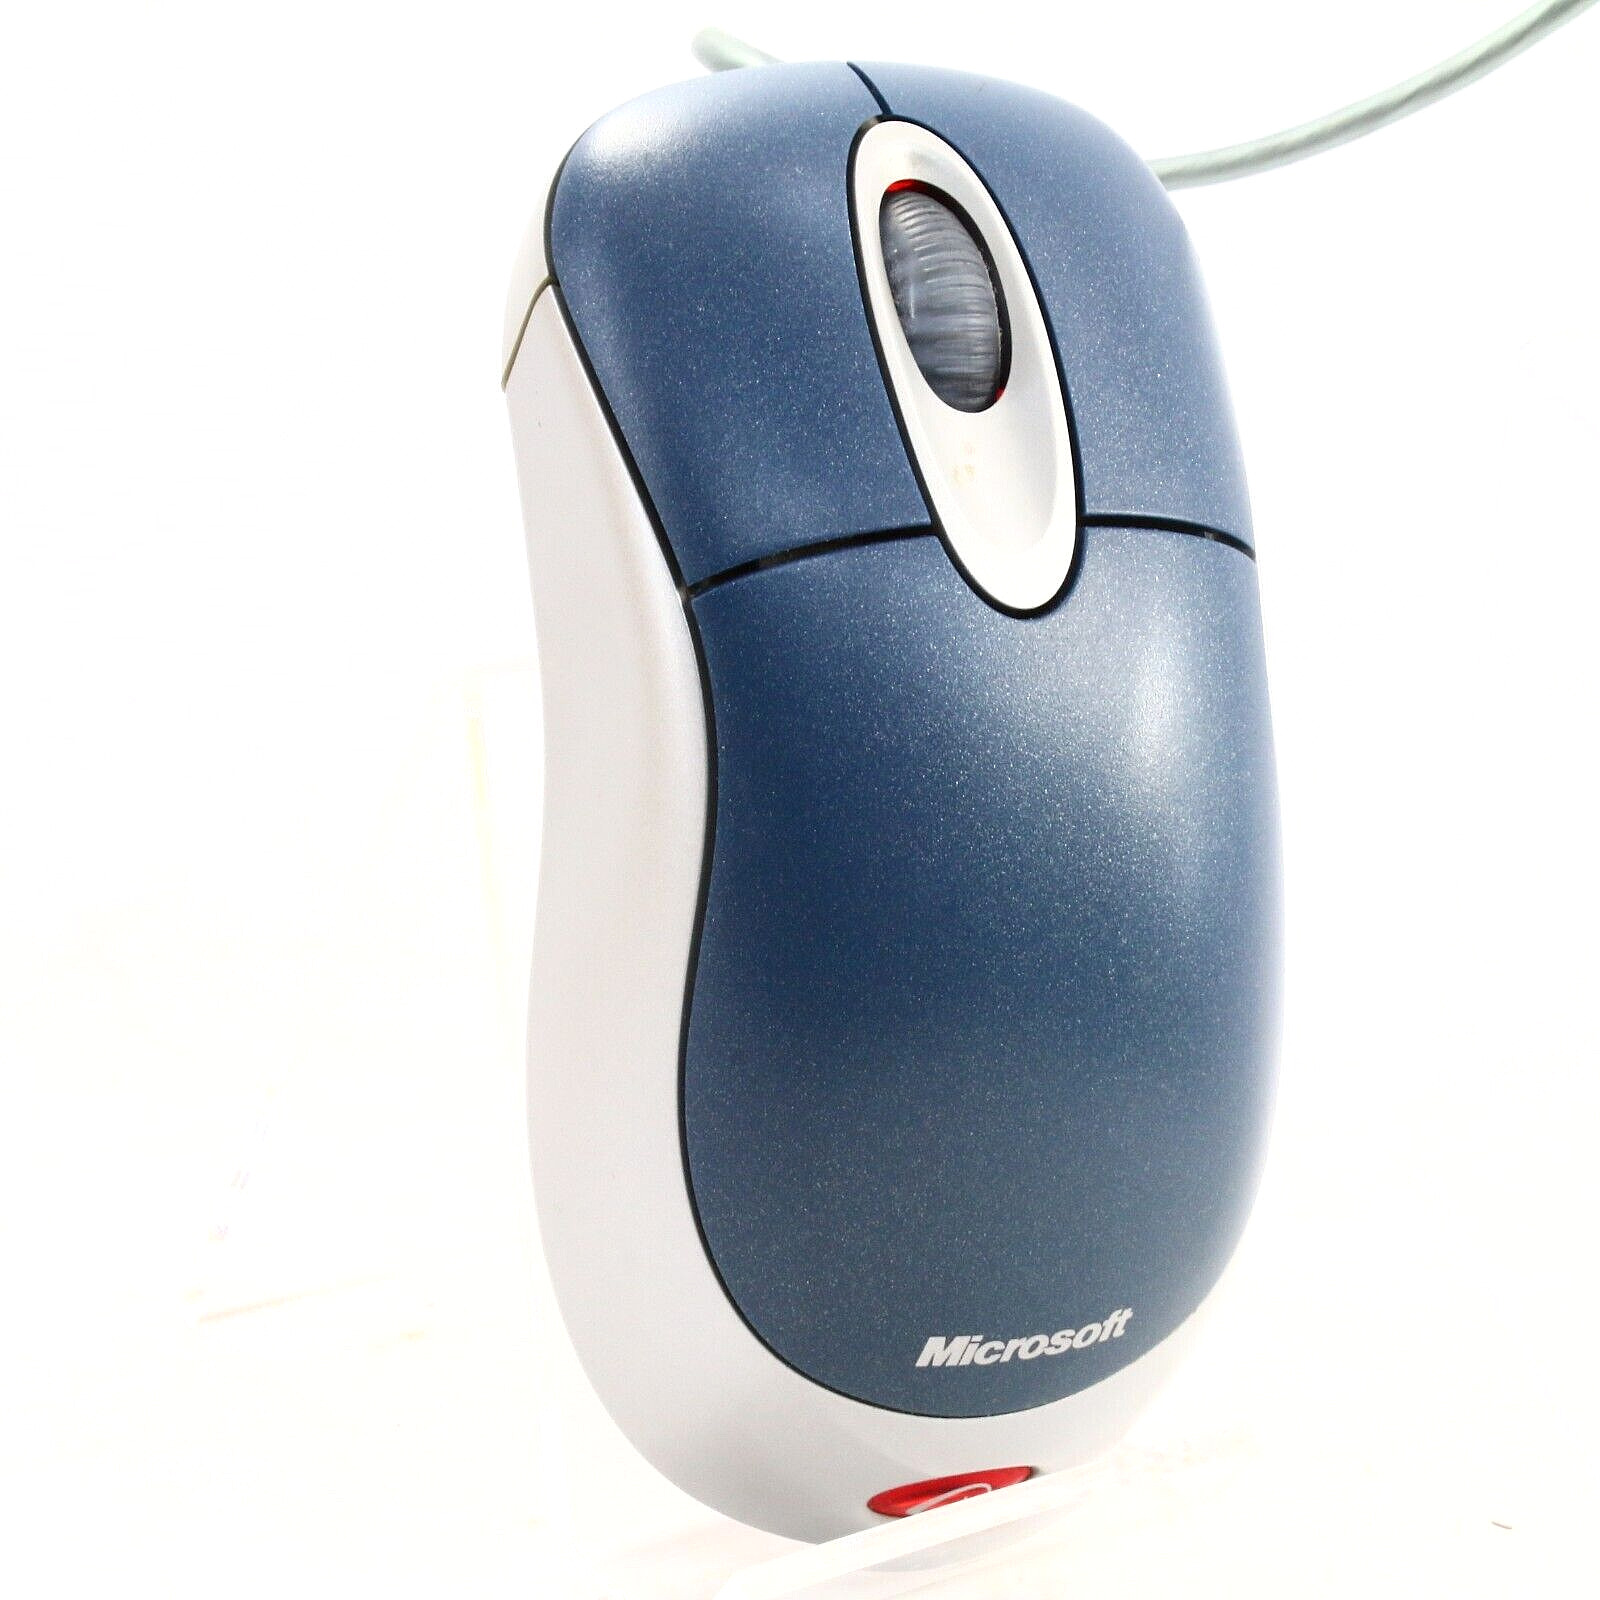 Microsoft Vintage Optical Mouse 3 Button Scroll USB Blue w/ Warranty & Fast Post